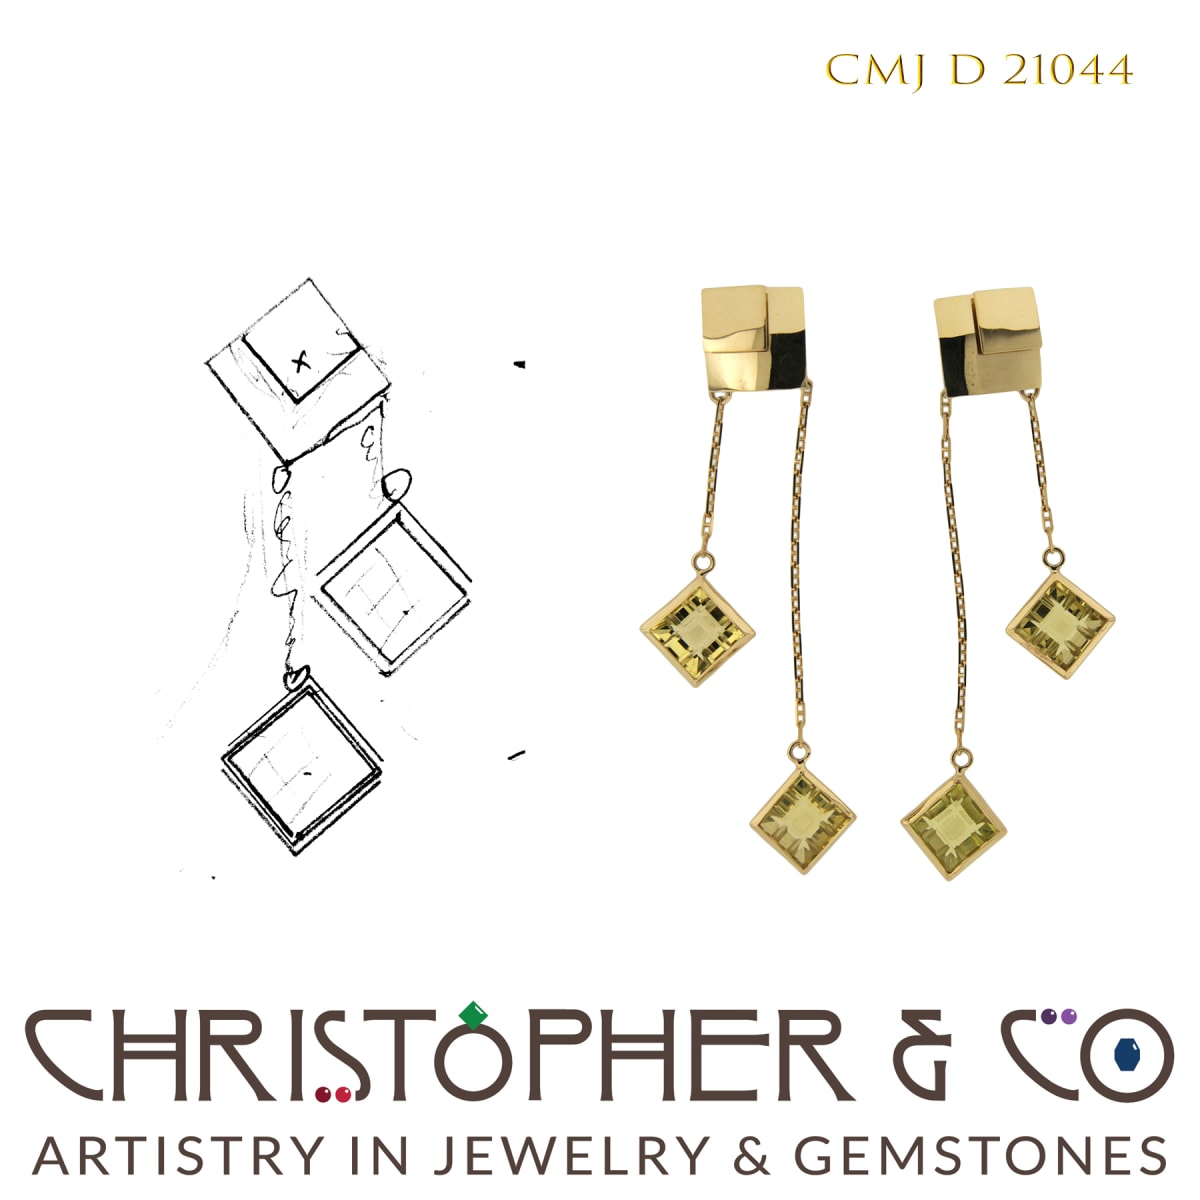 CMJ D 21044 Gold Earrings by Christopher M. Jupp set with four Lemon Citrine hand cut by Richard Homer  Image: CMJ D 21044 Gold Earrings by Christopher M. Jupp set with four Lemon Citrine Criss Cross tablets hand cut by Richard Homer